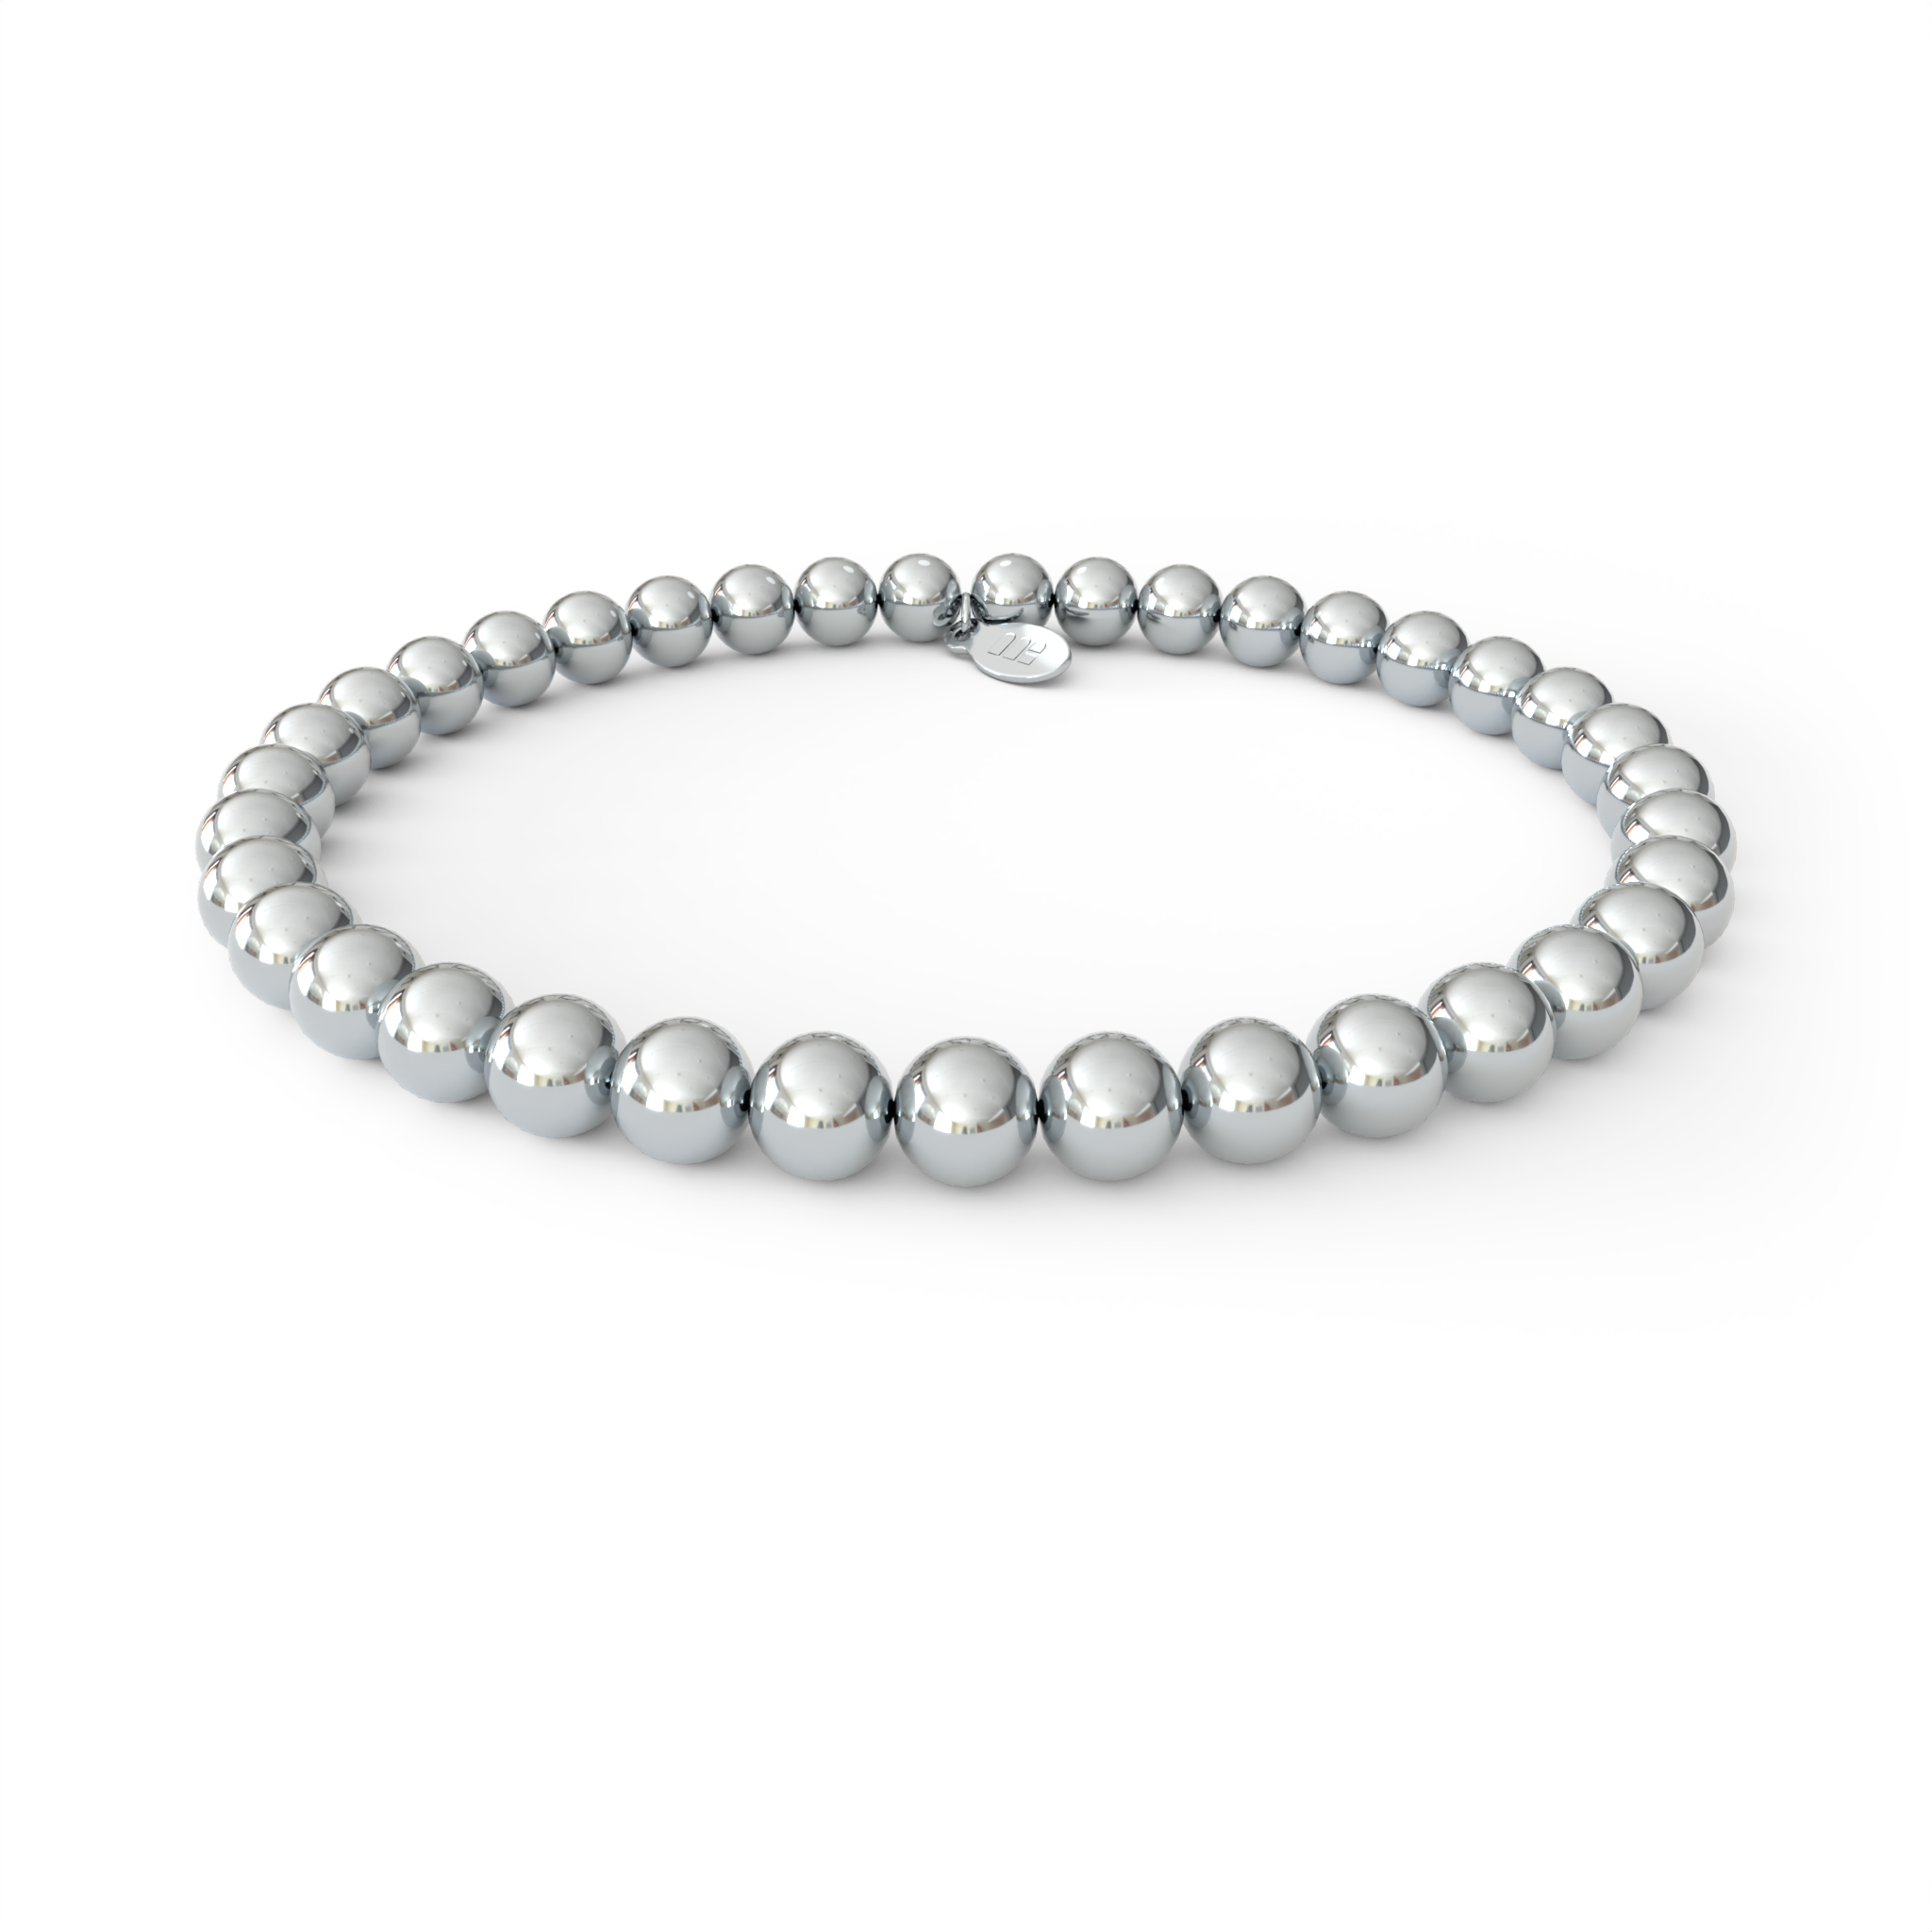 Cooper - 4mm - Faceted Matte Hematite Beaded Stretchy Bracelet with Sterling Silver Beads